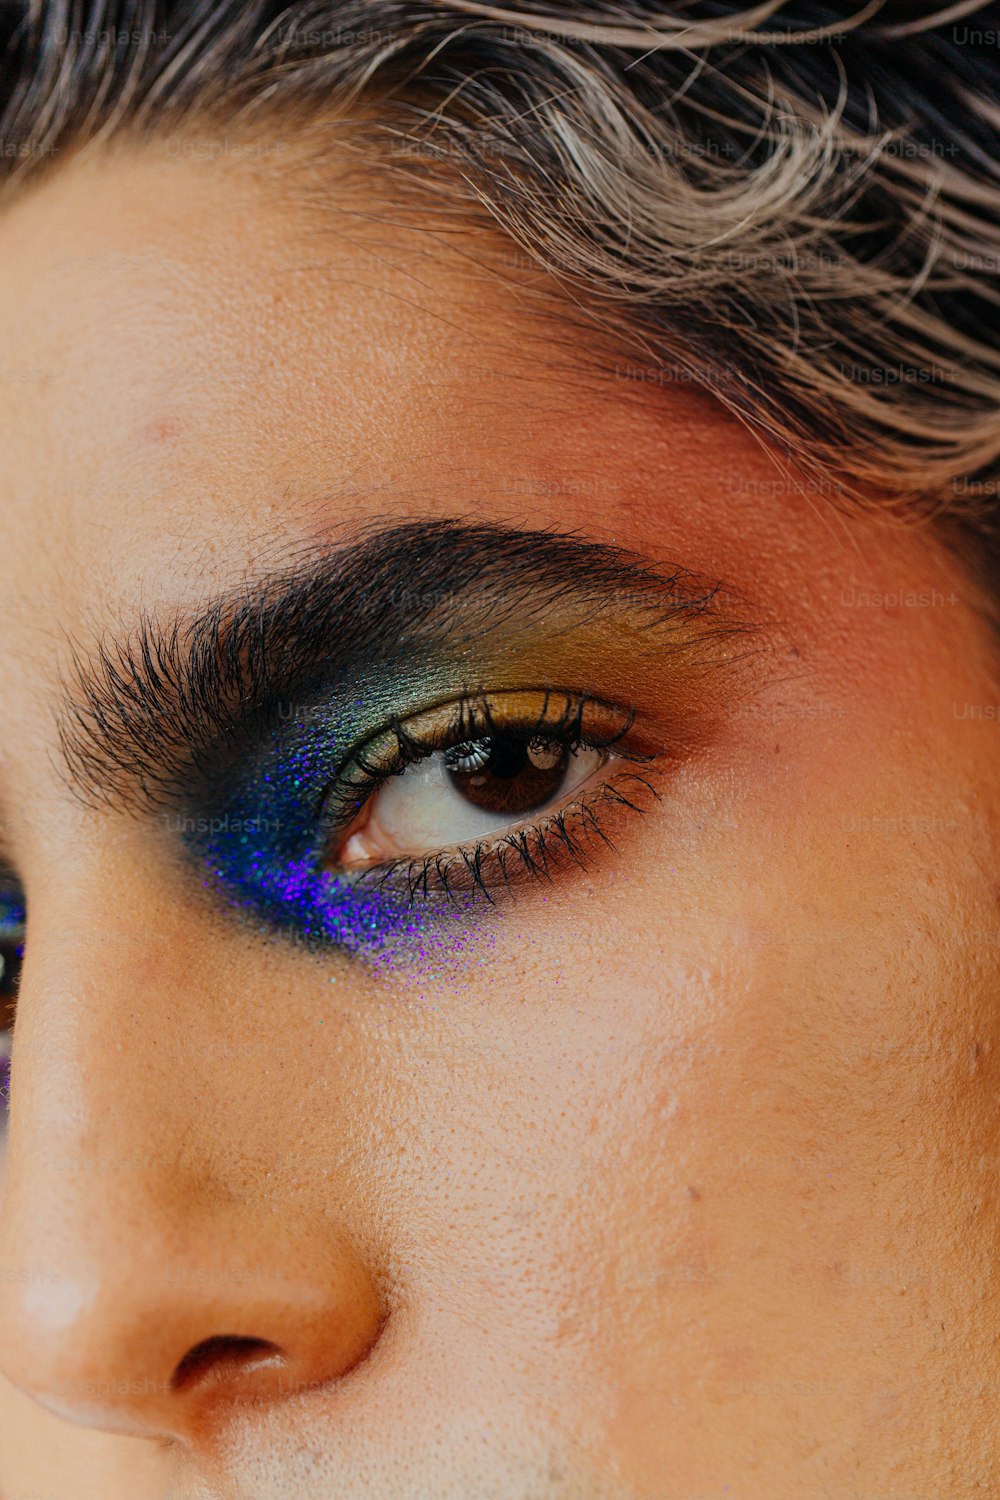 a close up of a person with a blue and purple eye shadow